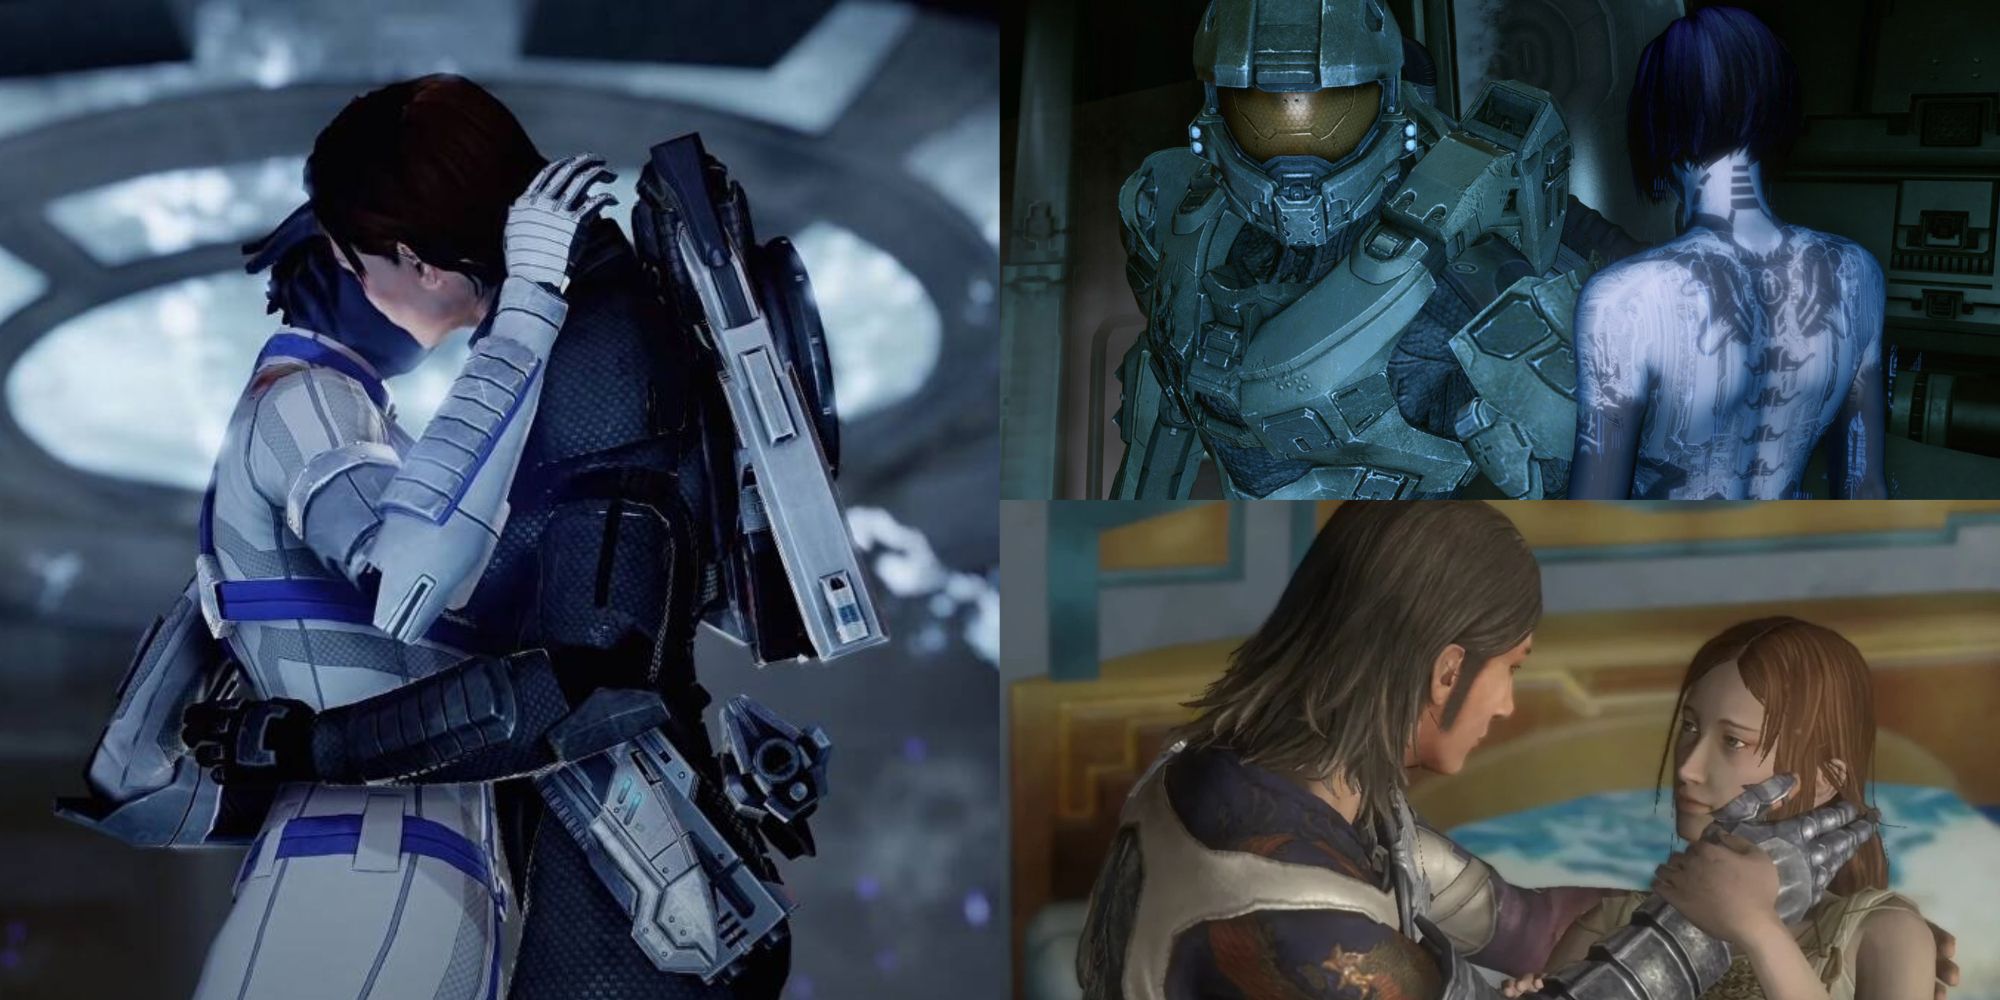 Shepard and Liara from Mass Effect, Master Chief and Cortana from Halo and Kiam and Sarah from Lost Odyssey